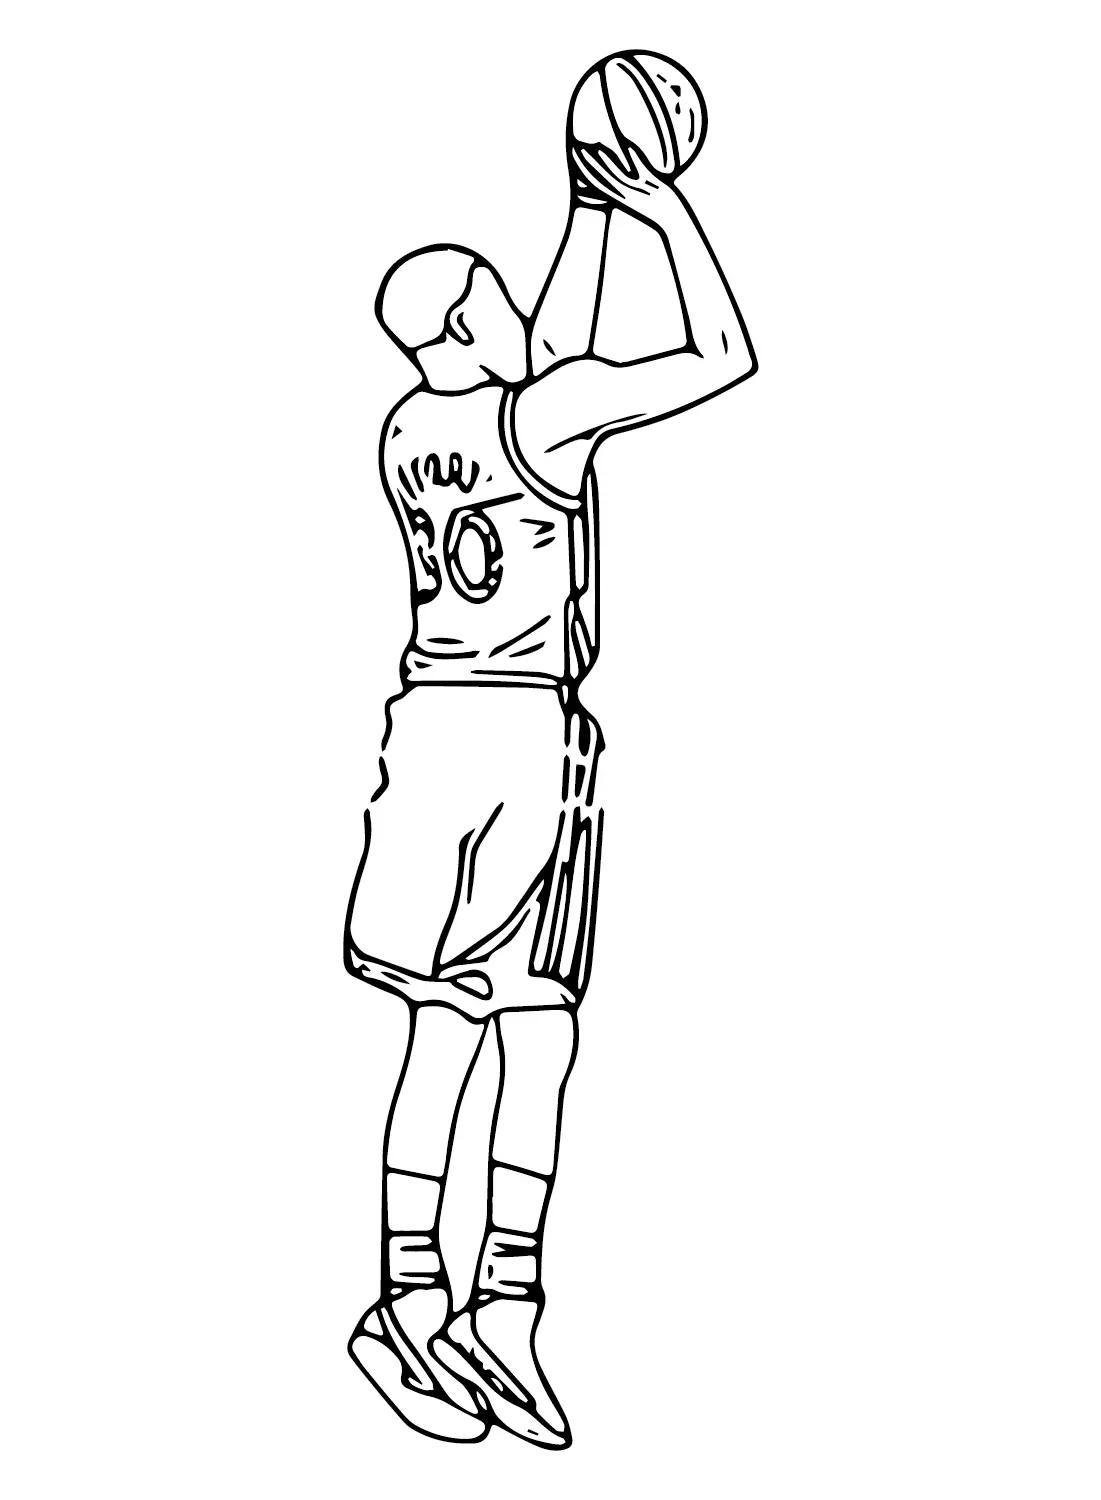 Stephen Curry Coloring Pages